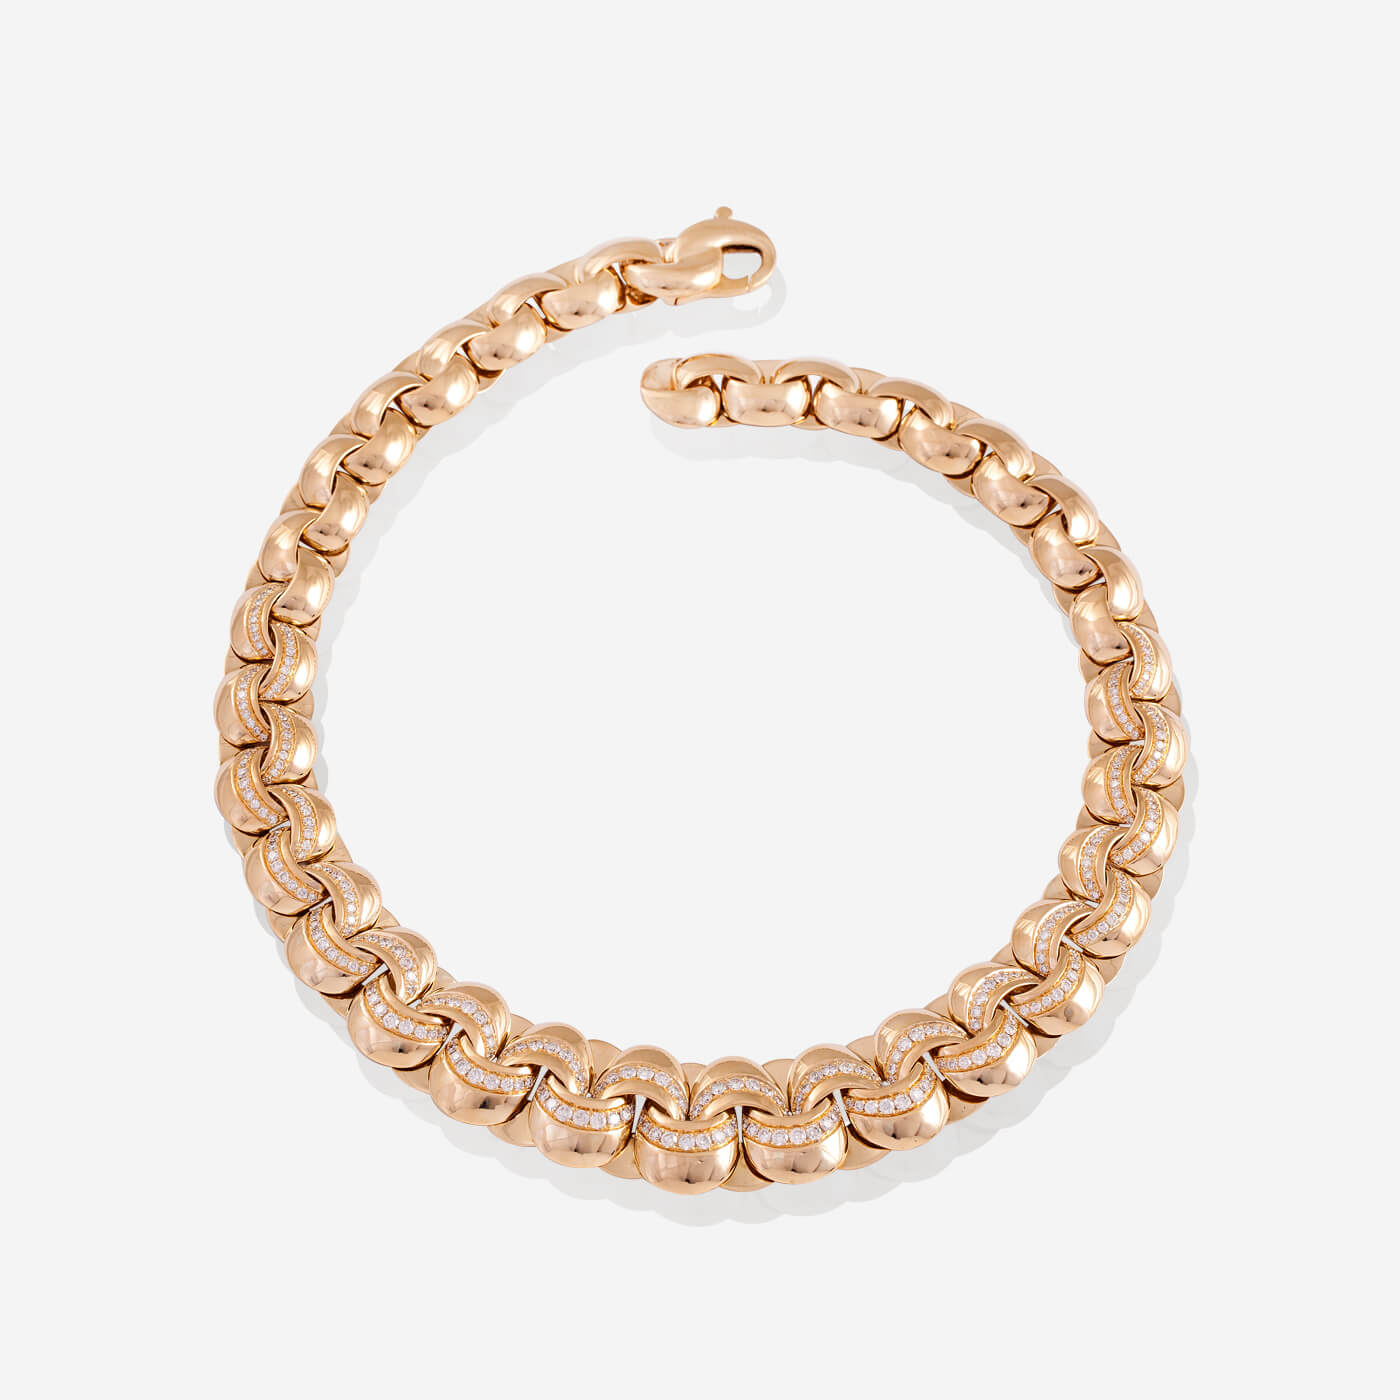 Rose Gold Interlinks With Diamonds Necklace - Ref: RG03540